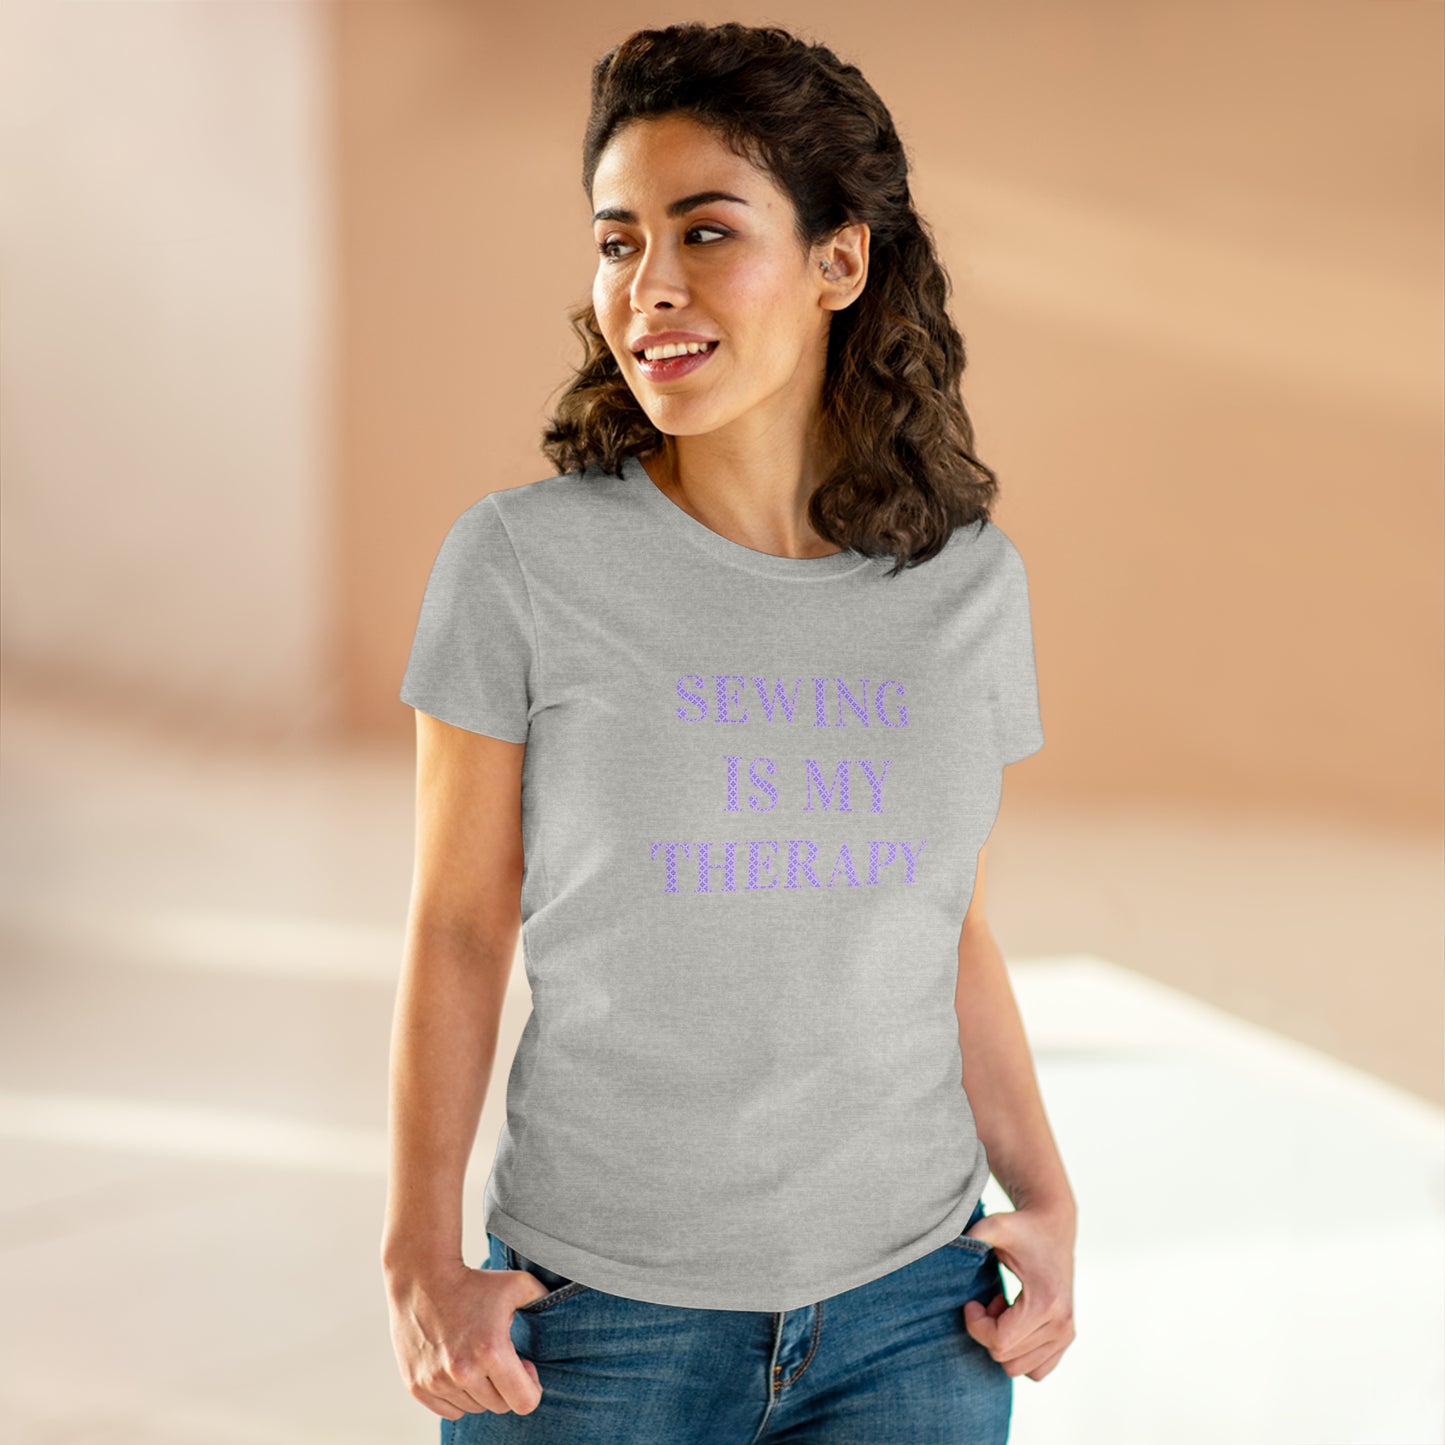 Sewing Is My Therapy- Adult, Semi-fitted T-shirt